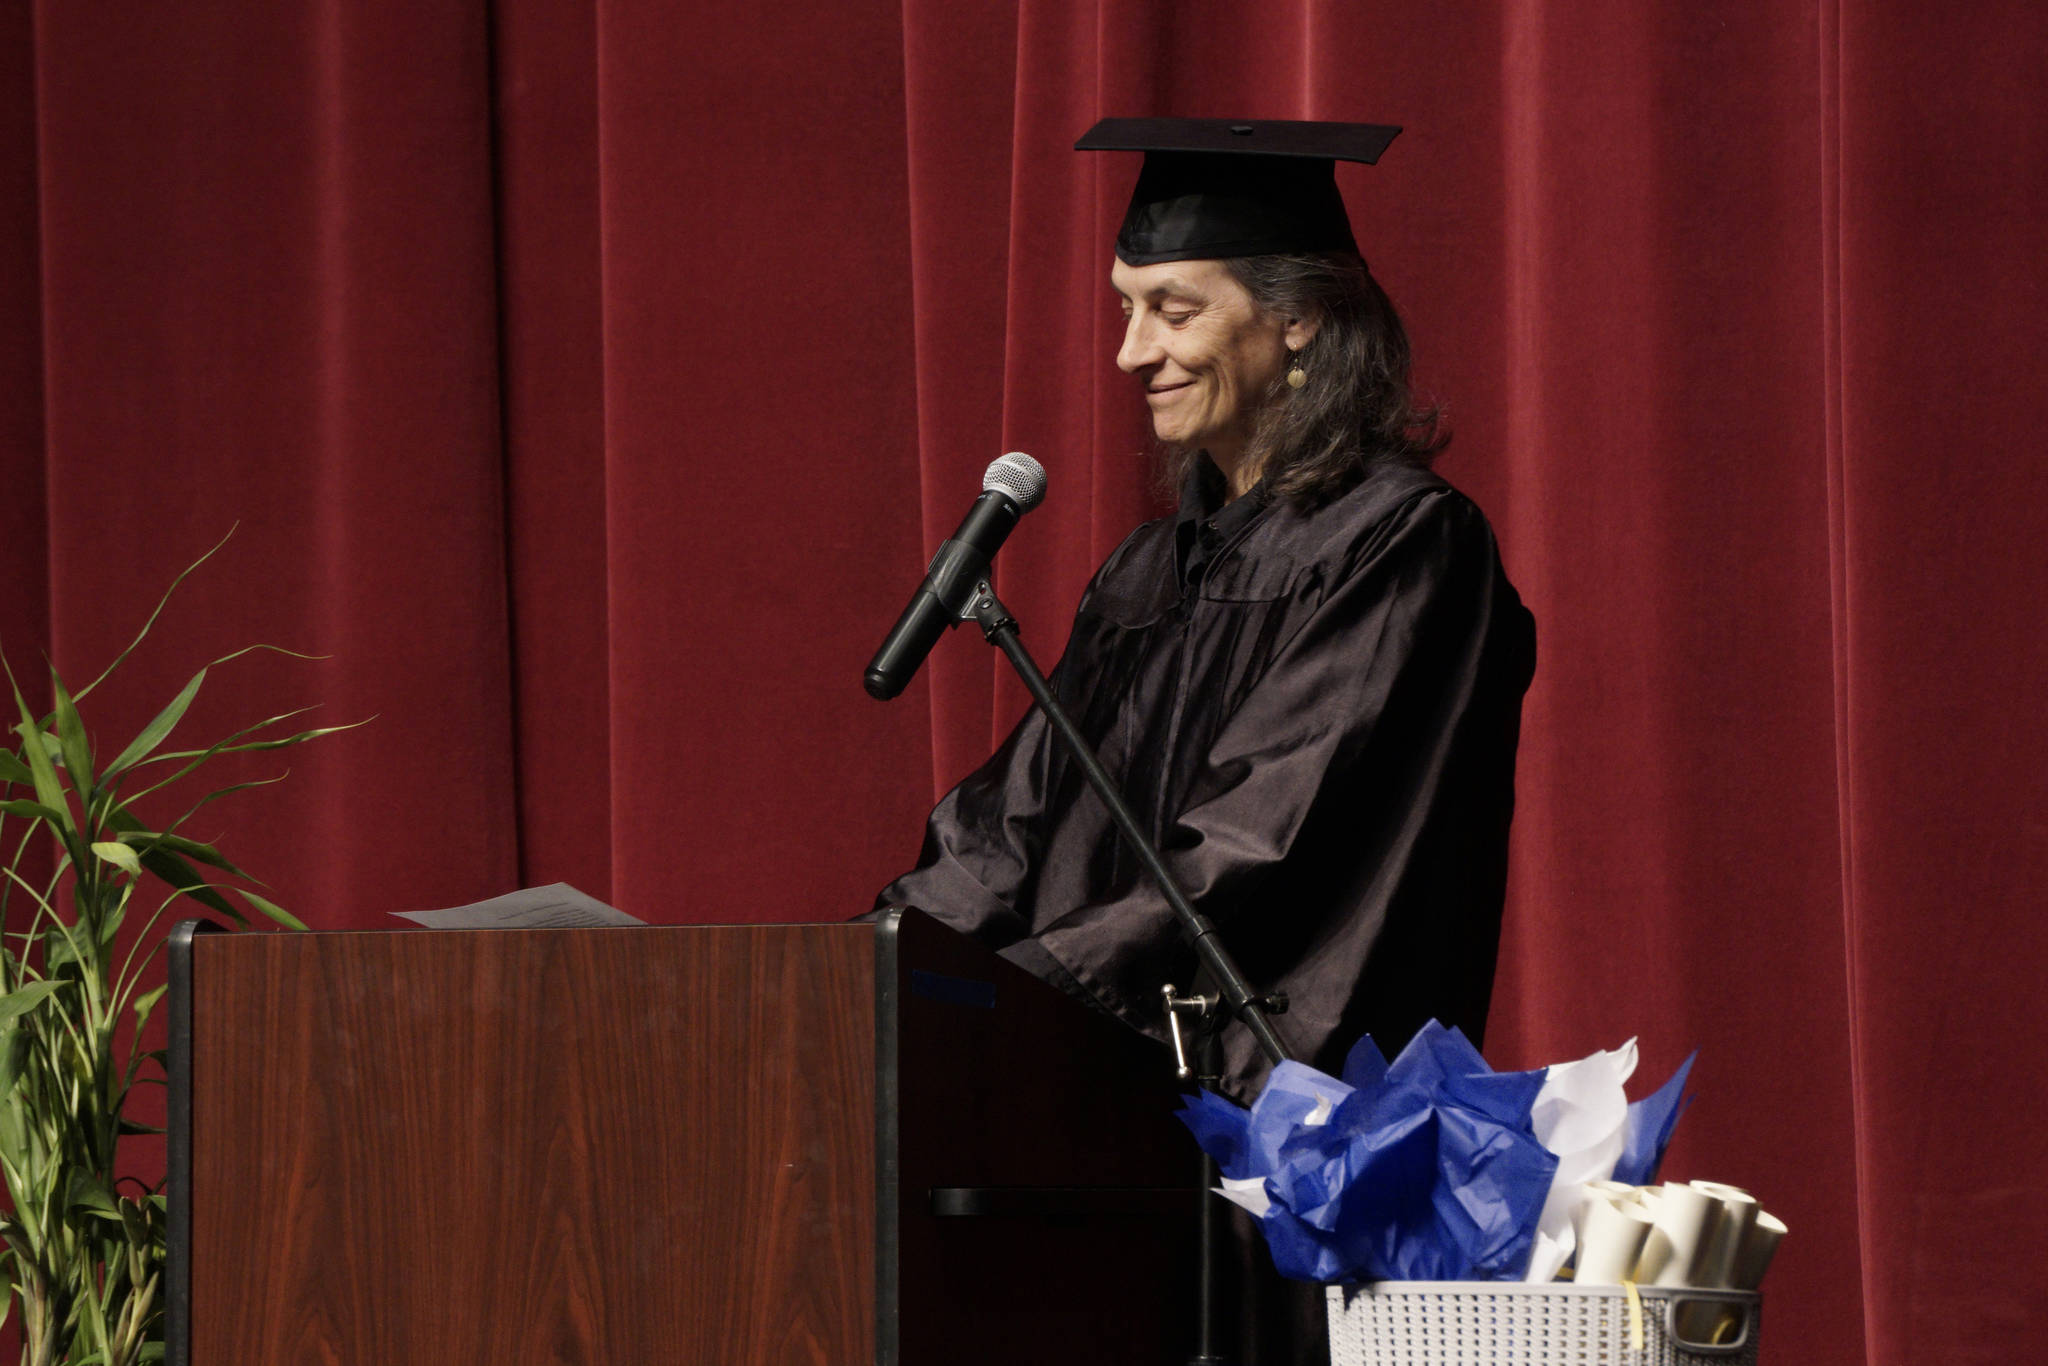 Catie Bursch delivers the keynote address at the Kachemak Bay Campus commencement last Wednesday, May 8, 2019, at the Mariner Theatre in Homer, Alaska. (Photo by Michael Armstrong/Homer News.)